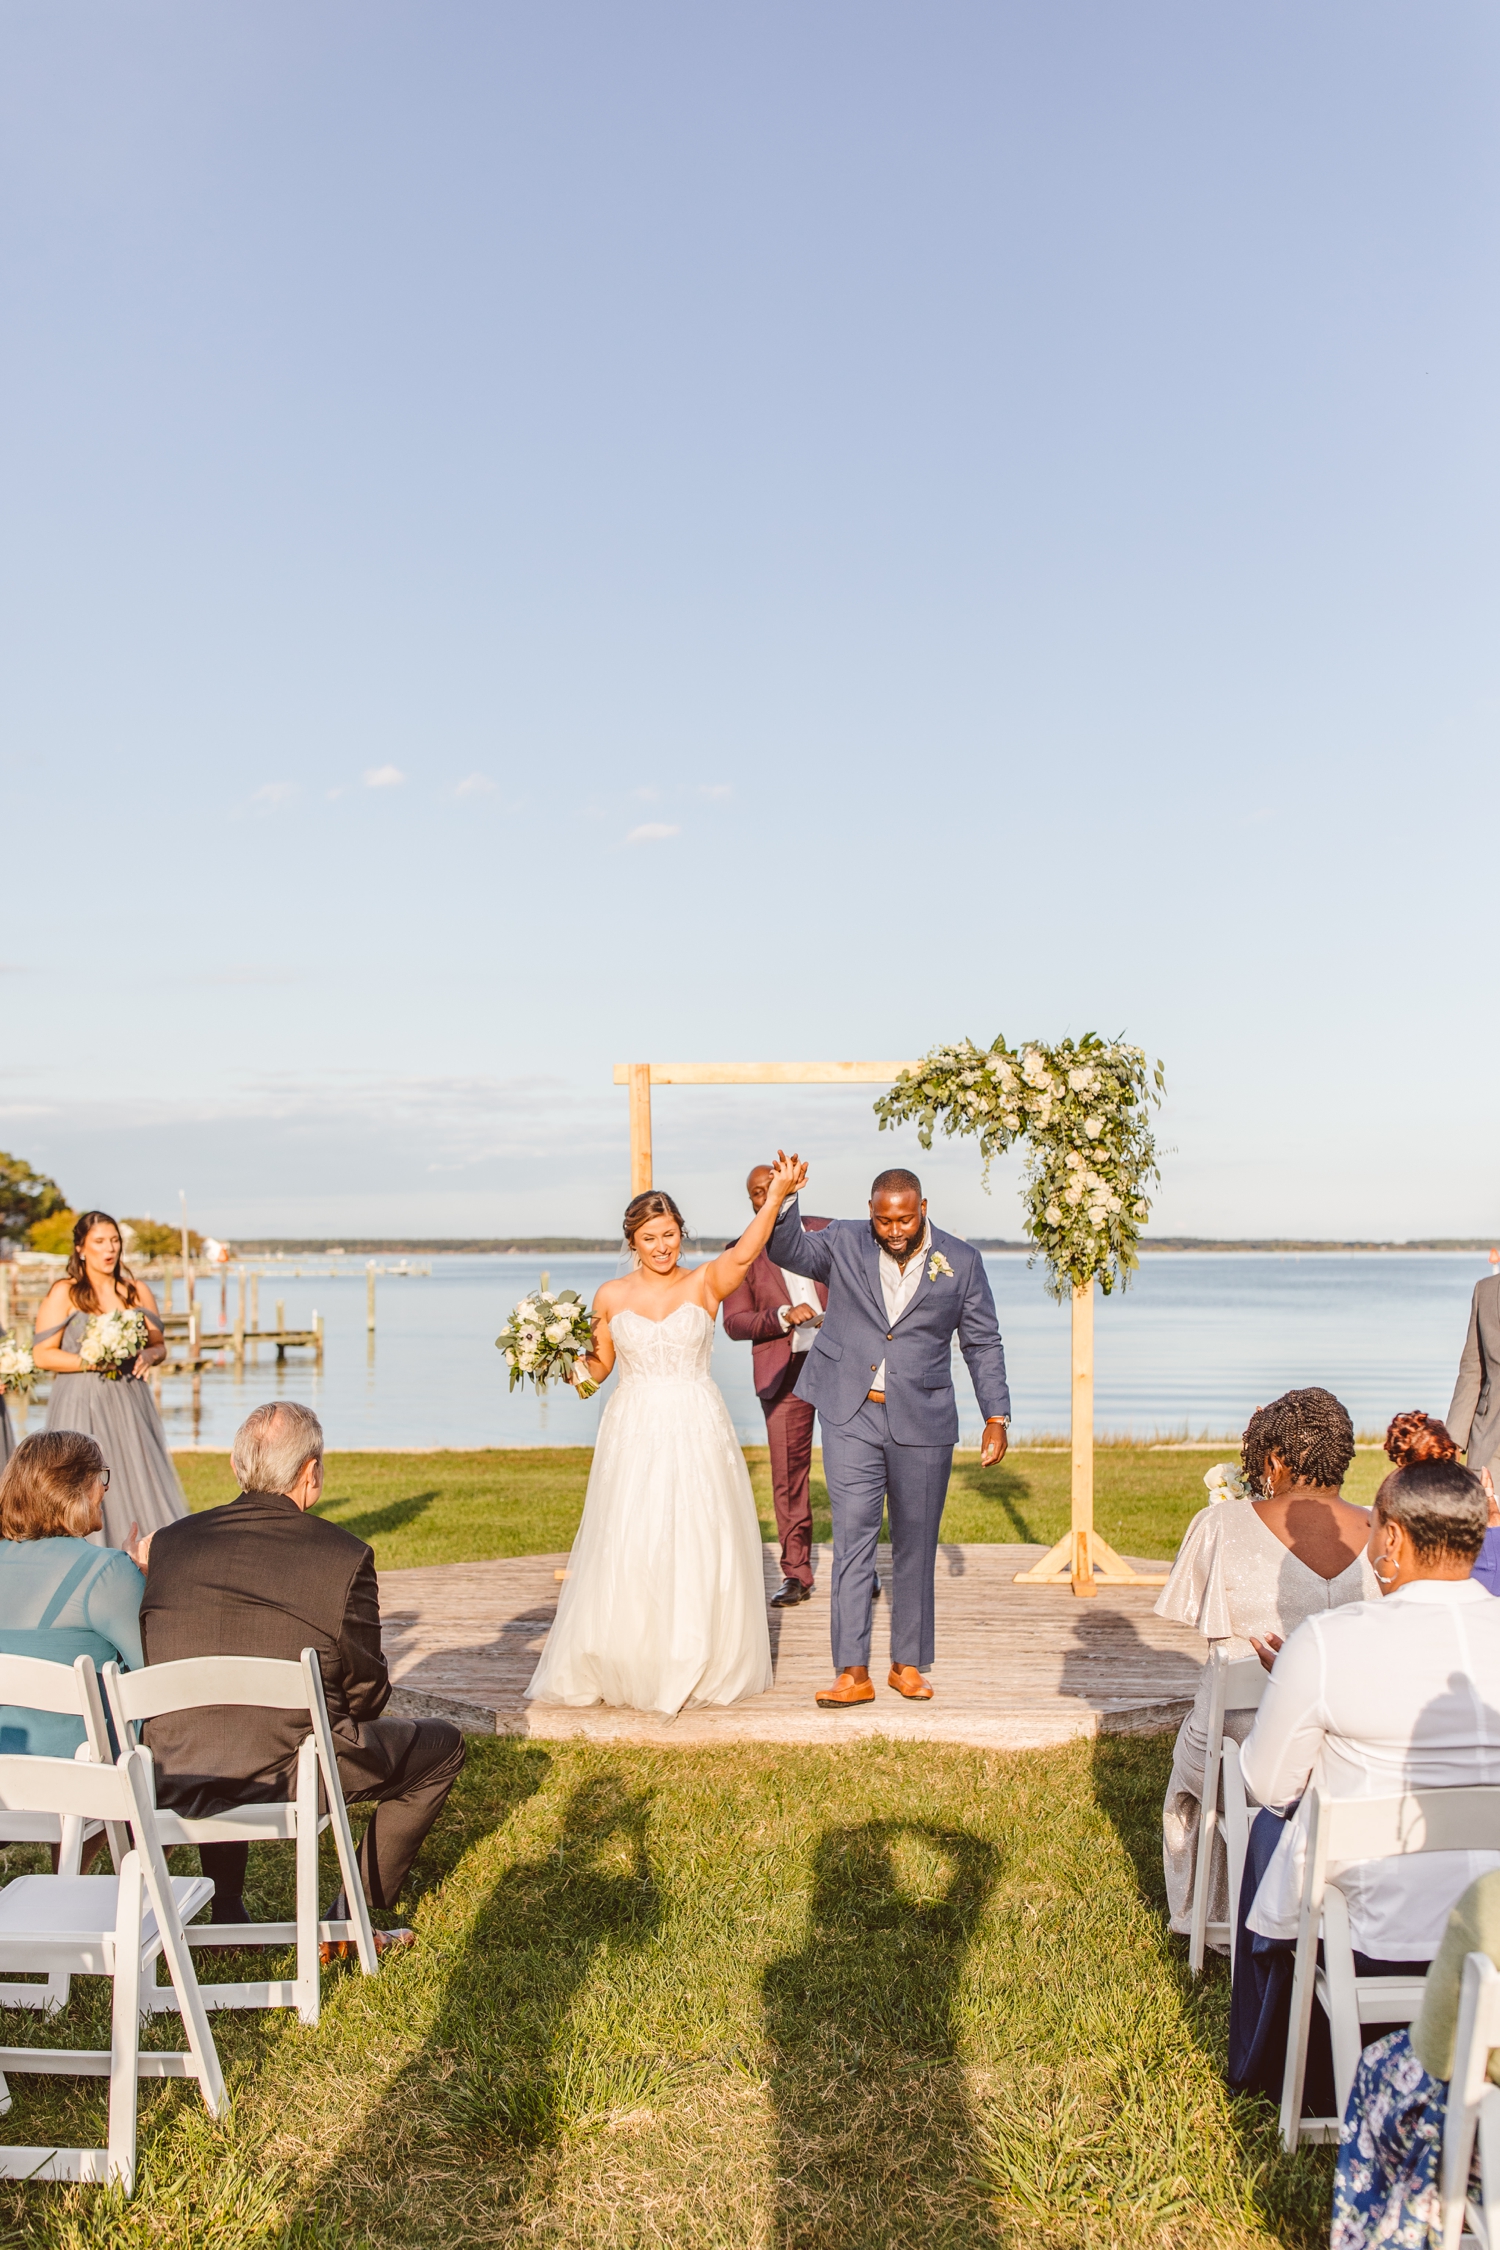 Bride and groom exiting ceremony at Wylder Hotel Tilghman Island wedding | Brooke Michelle Photography